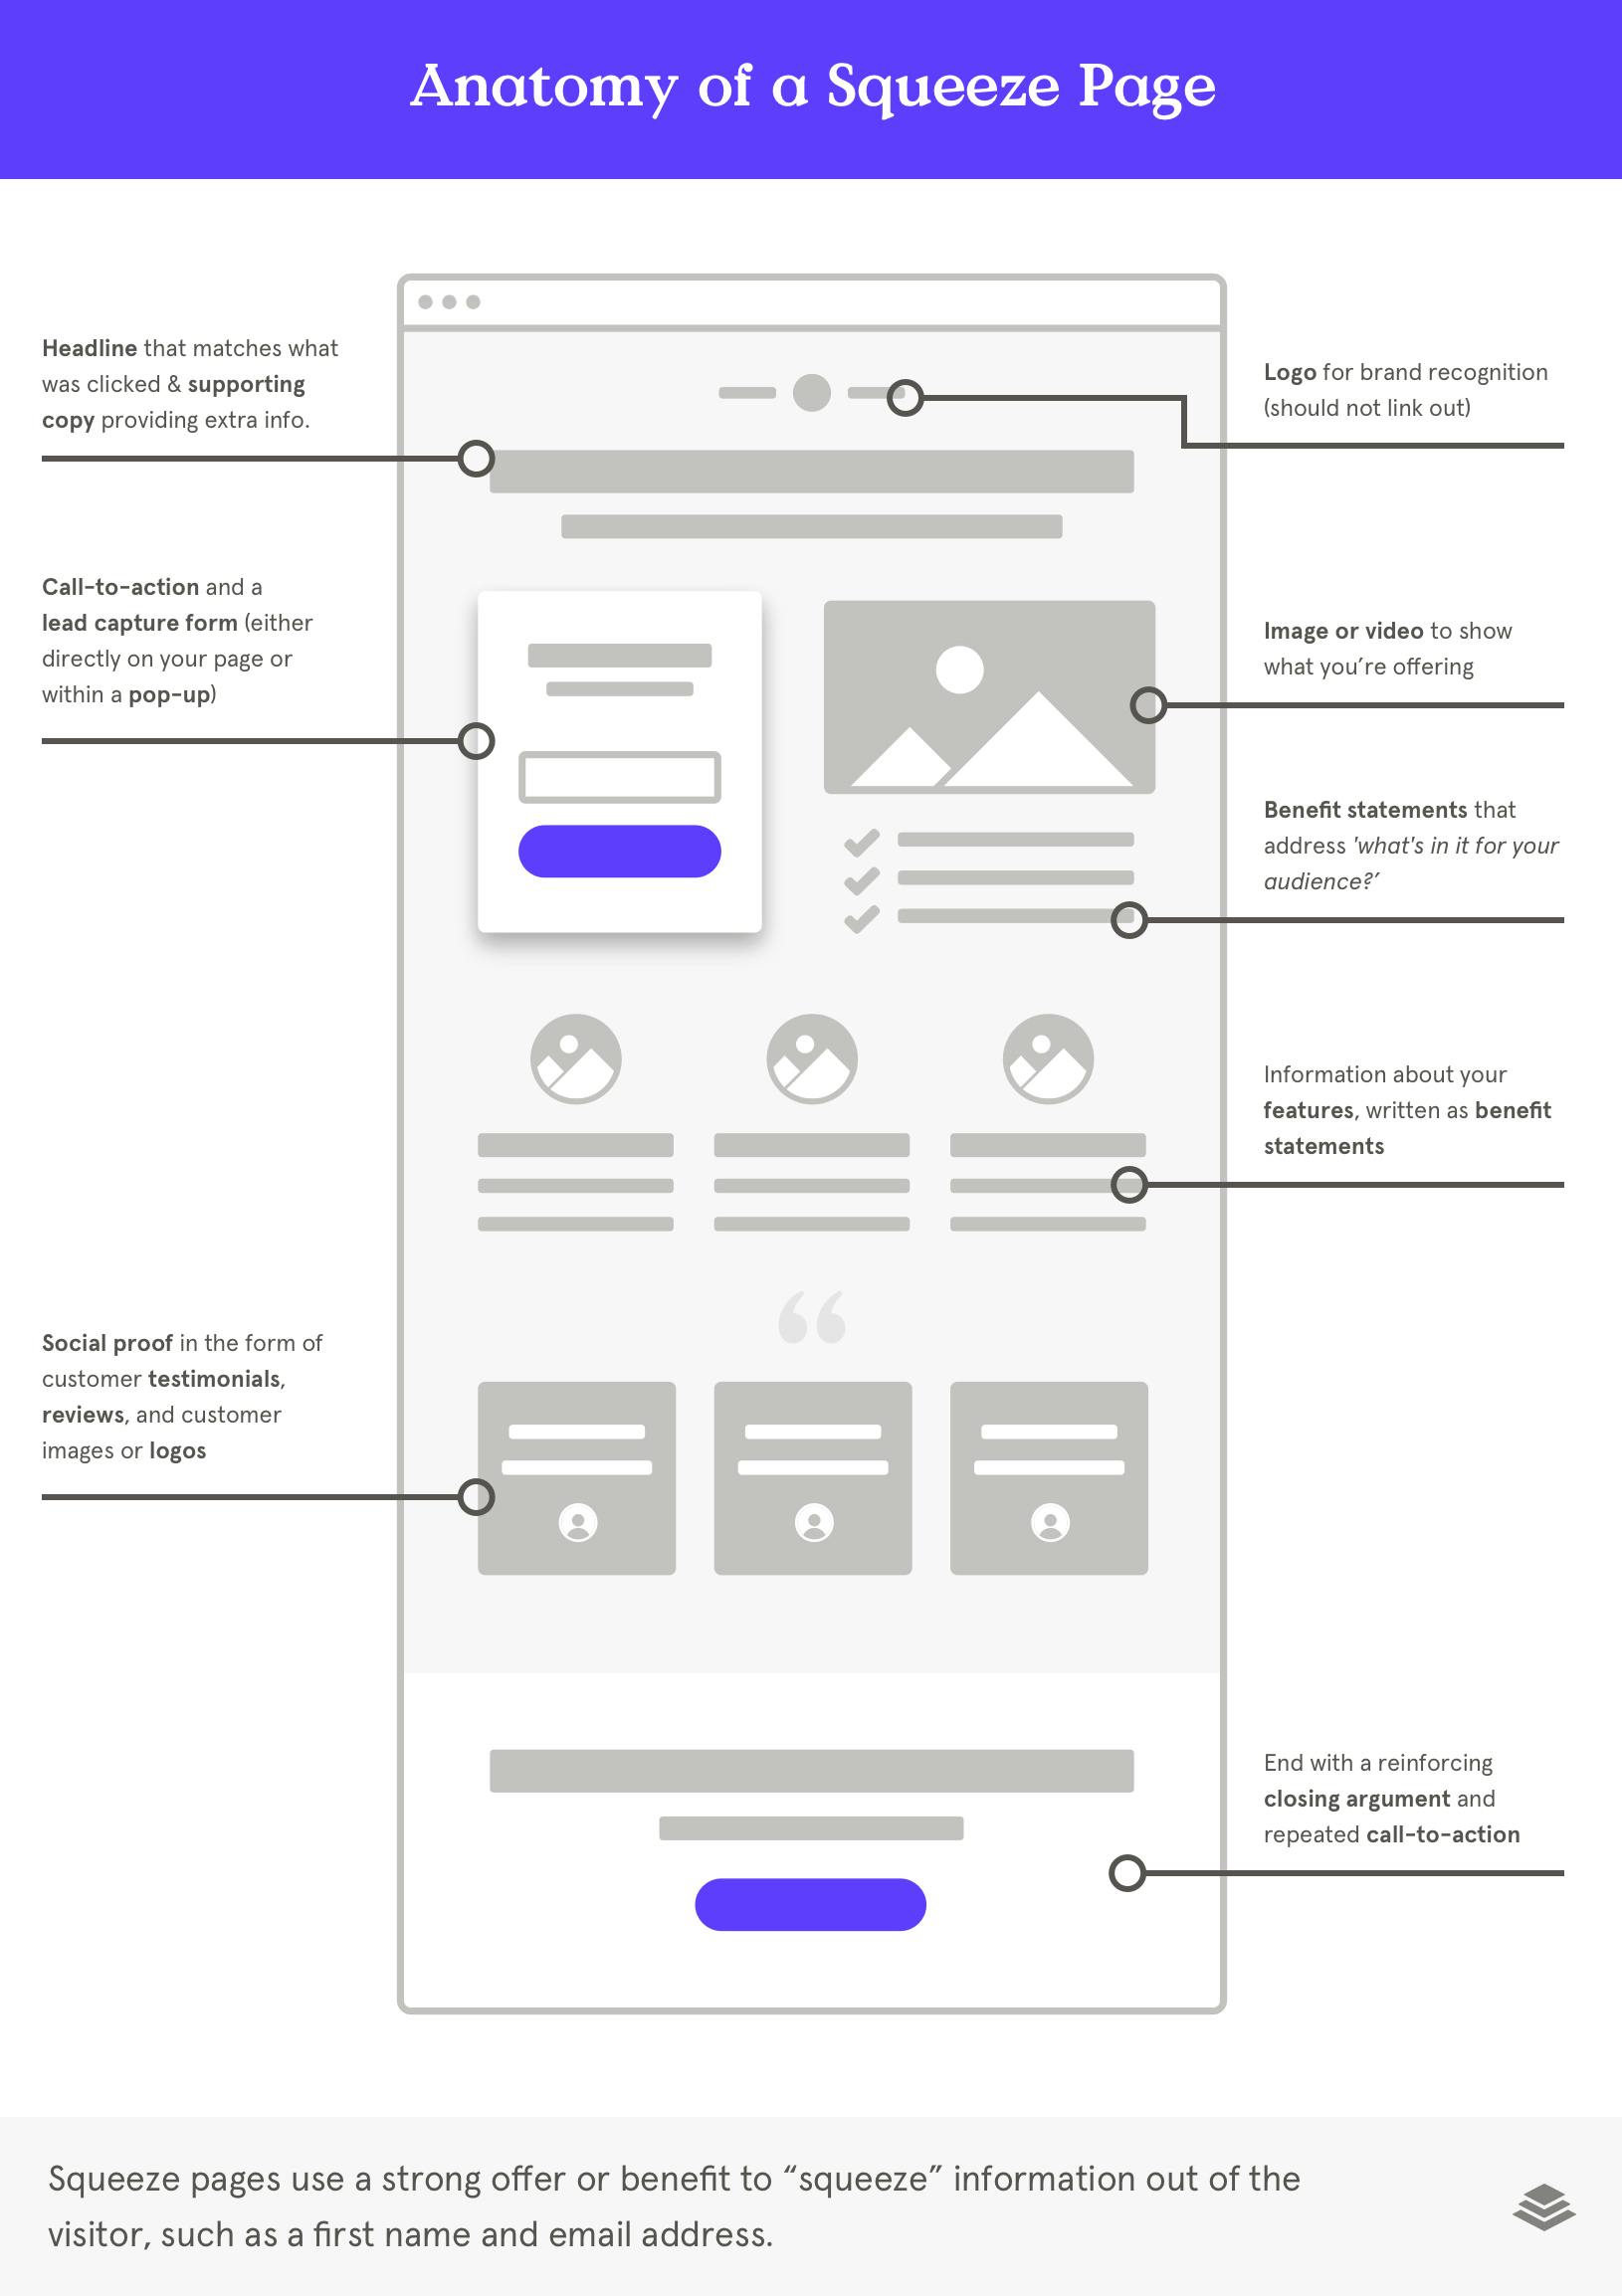 anatomy of a squeeze page landing page example